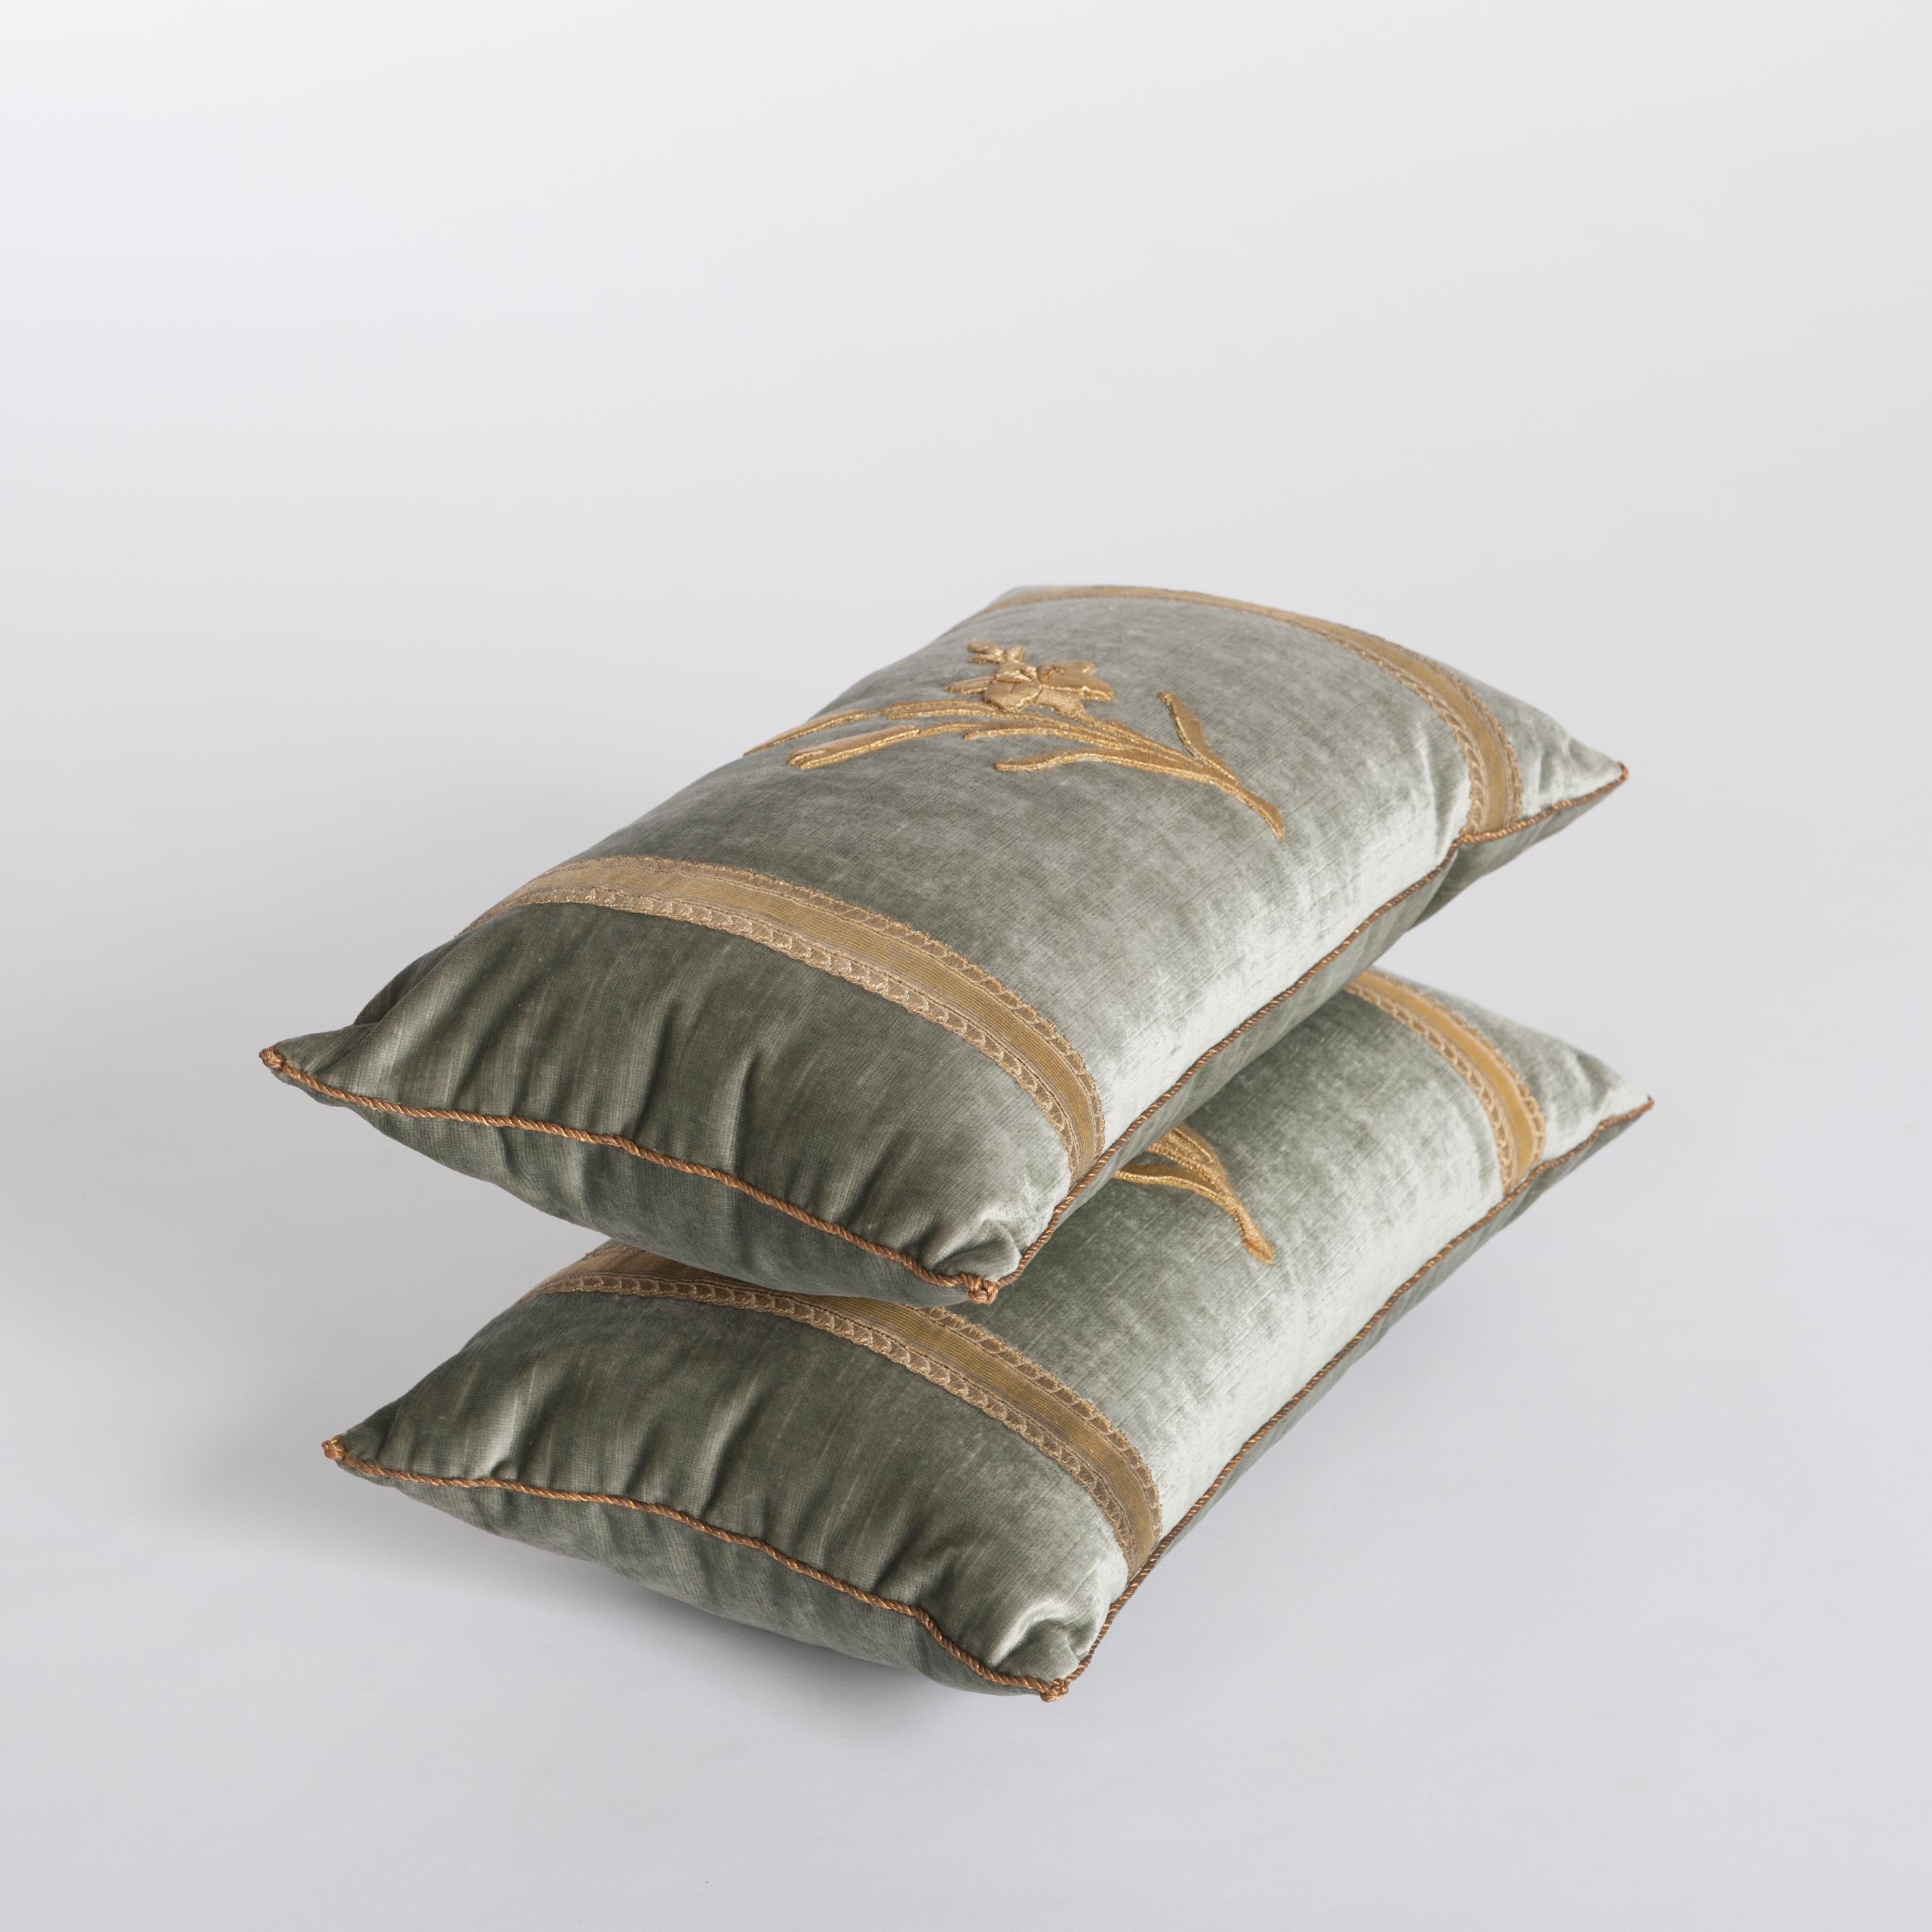 French Pair of Pastel Green Colored Velvet Pillows with Antique Metallic Embroidery  For Sale